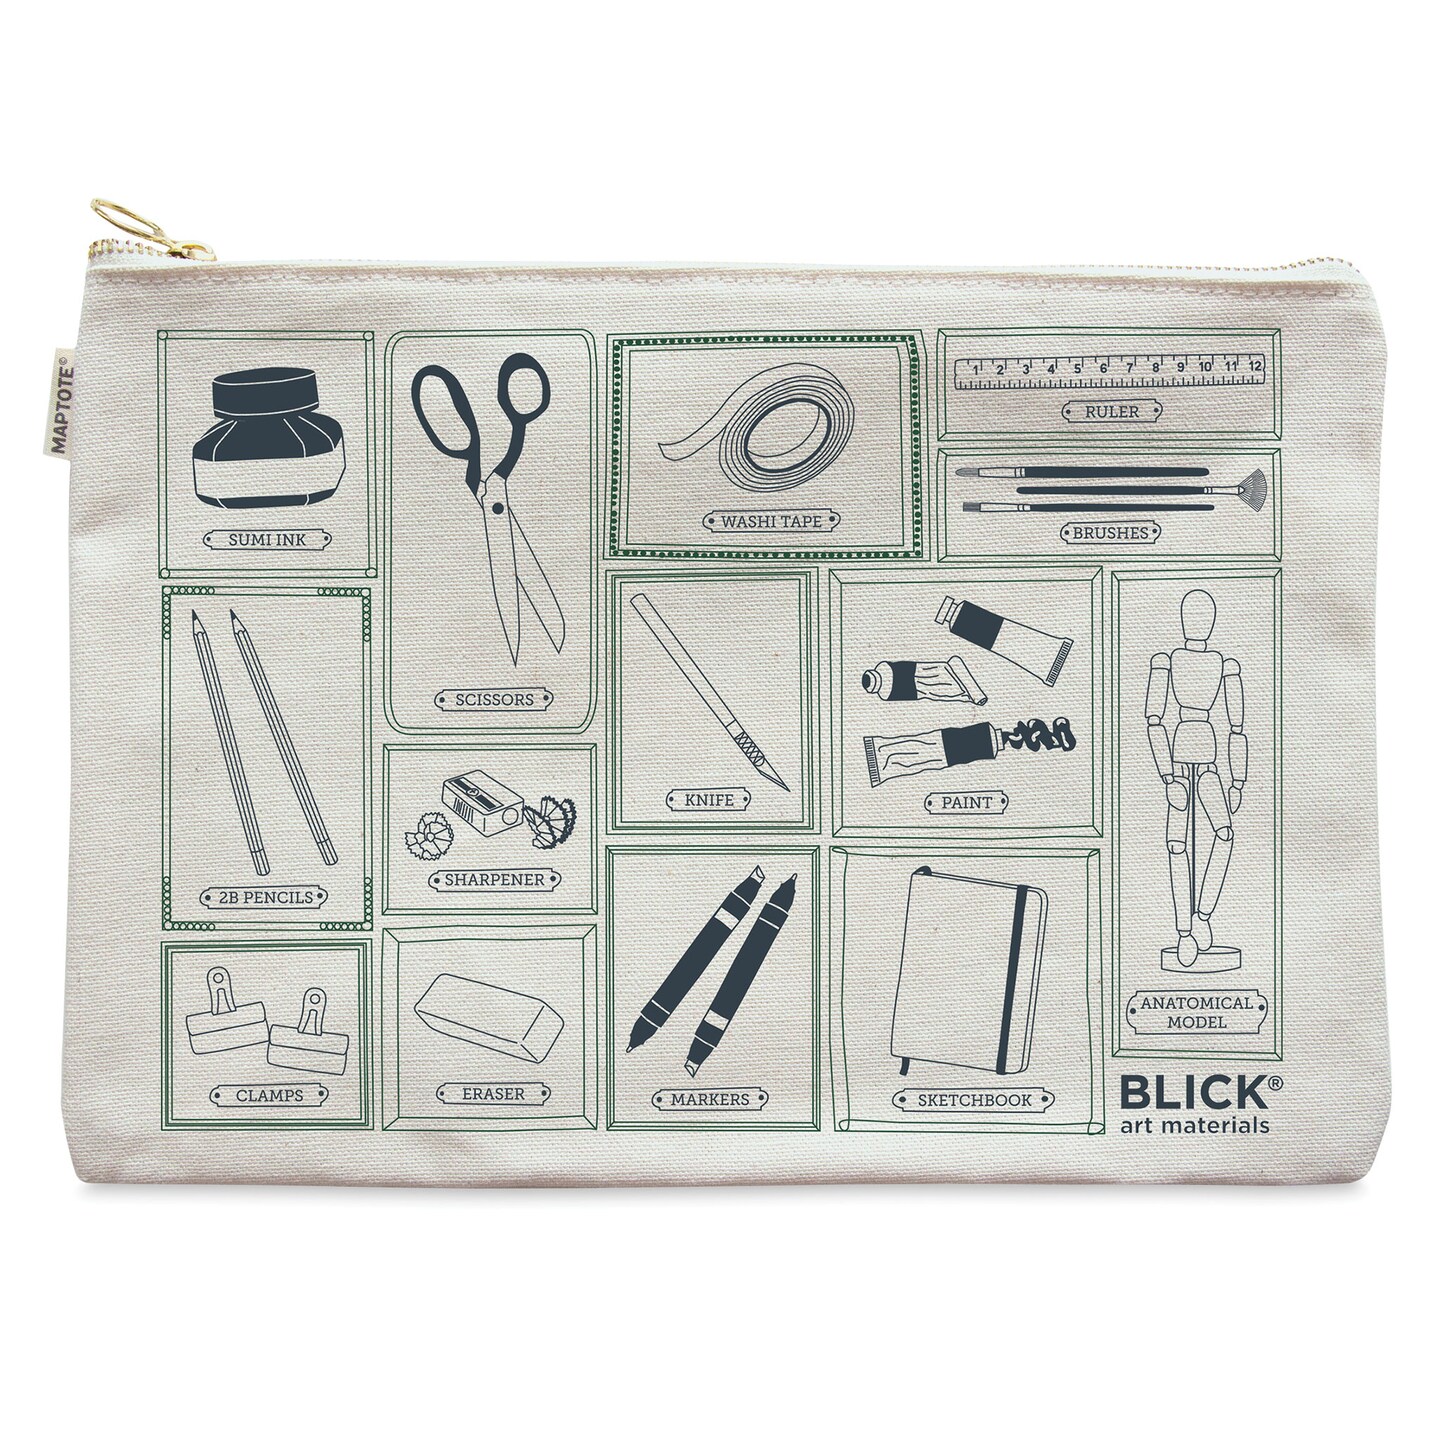 Blick Flat Zip Pouch by Maptote - Gray and Green